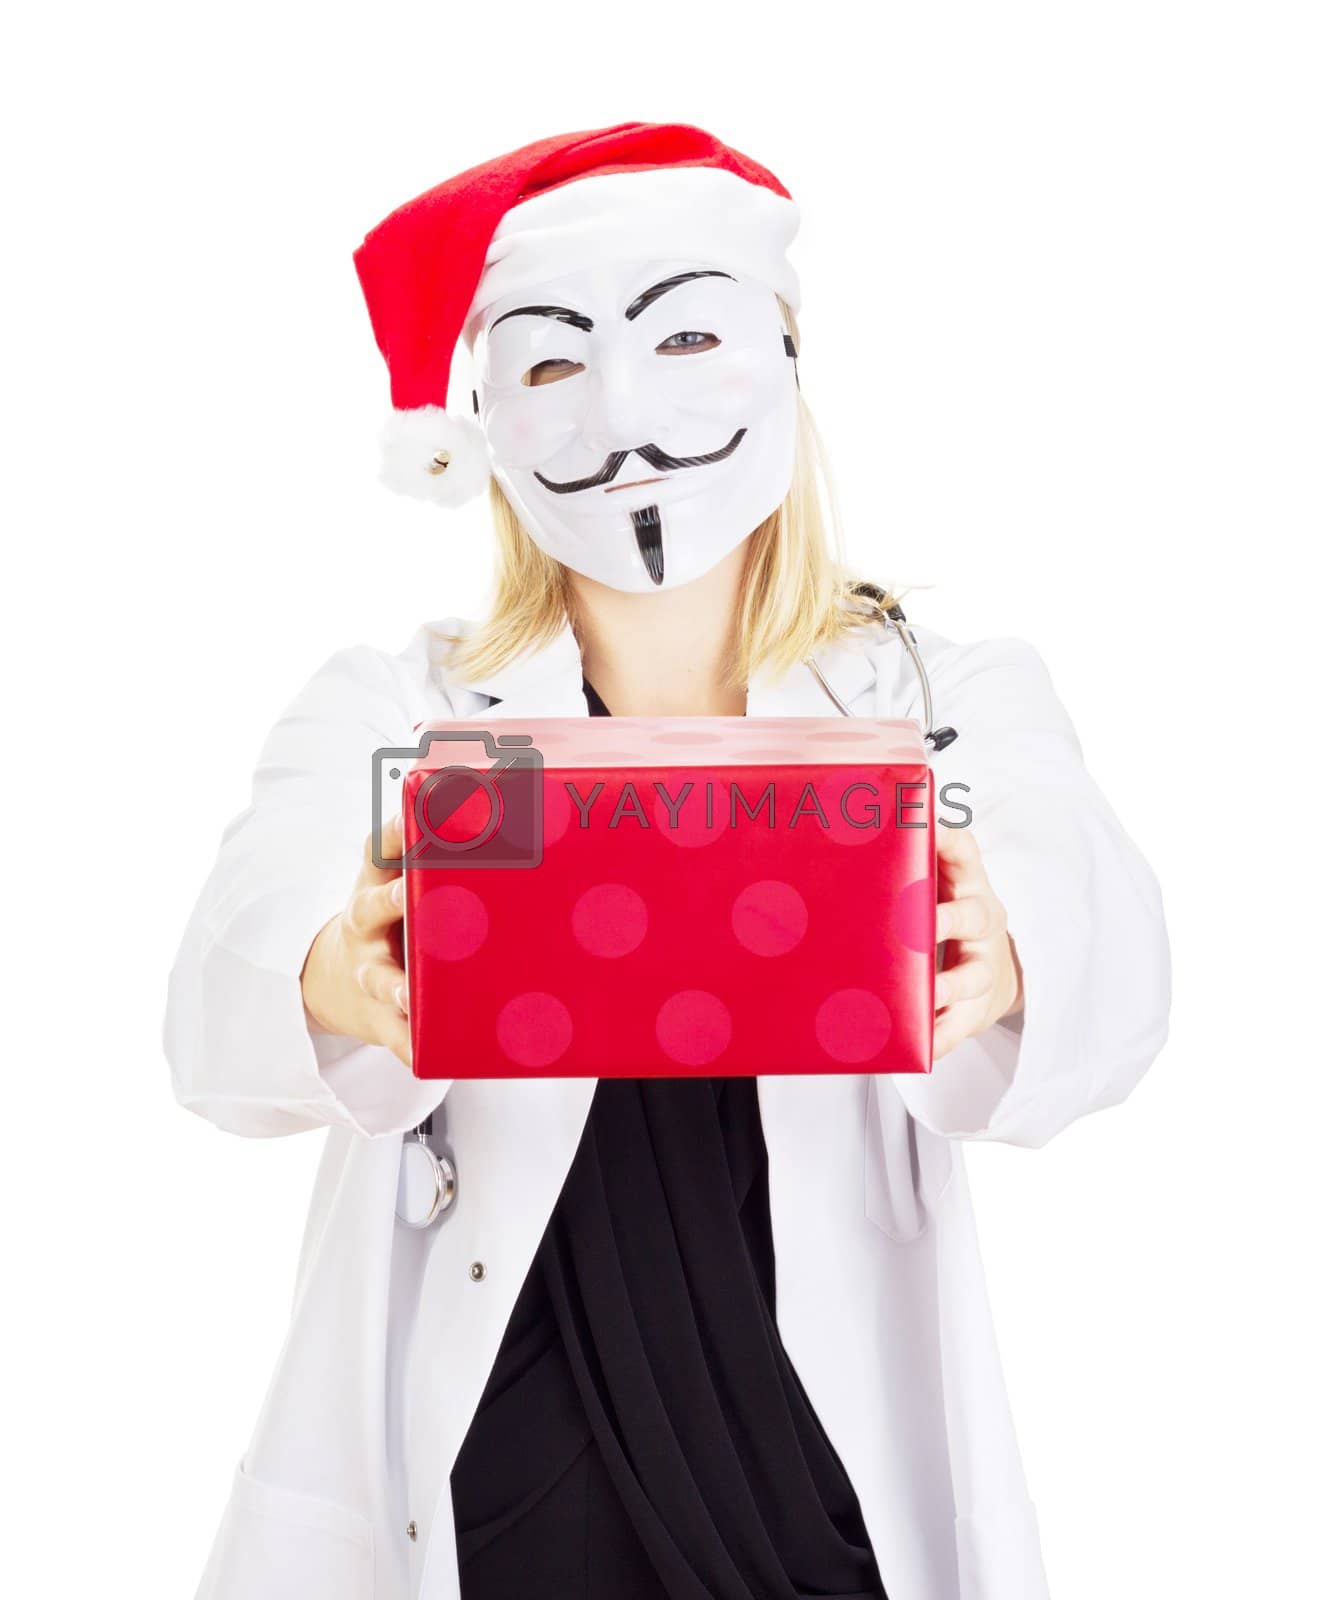 Royalty free image of Medical doctor with a guy fawkes mask by gwolters